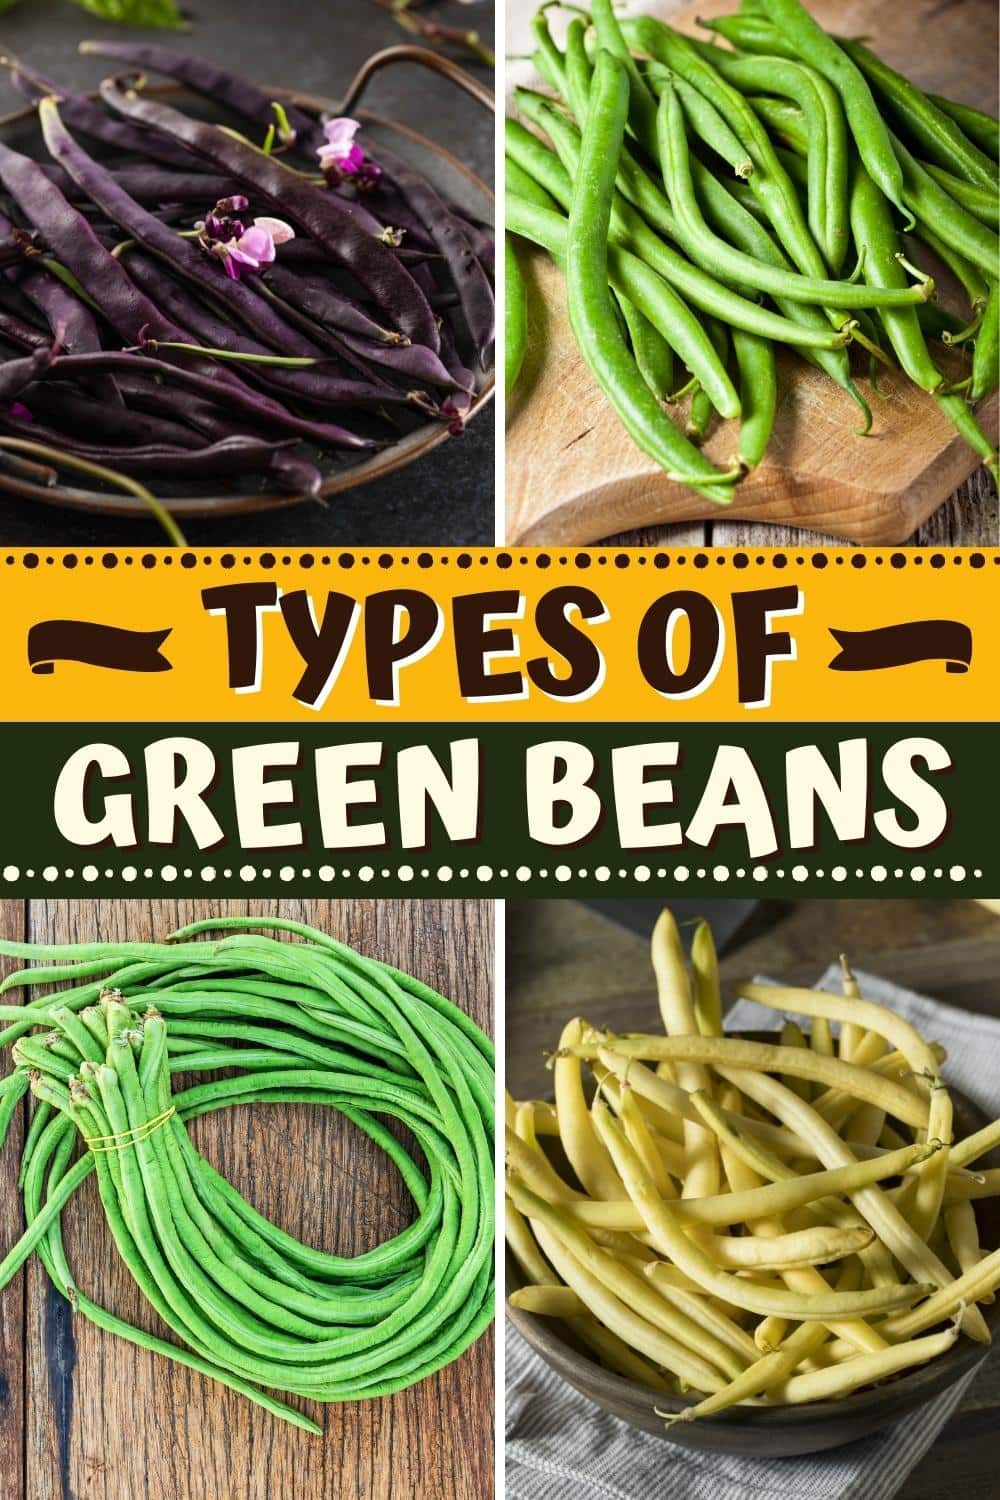 Types of Green Beans